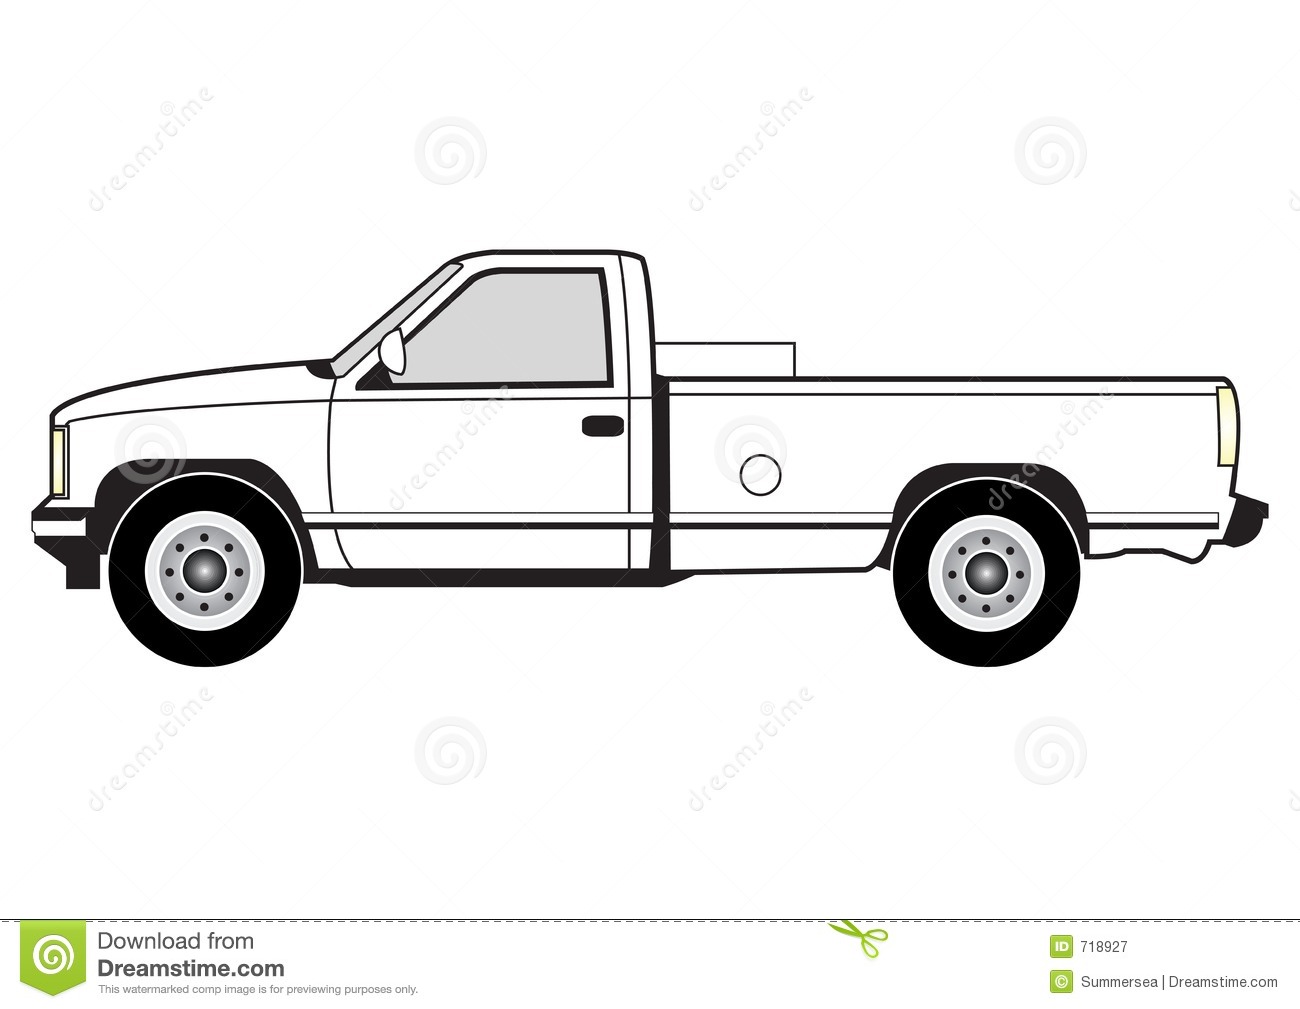 Line Art   Pick Up Royalty Free Stock Photography   Image  718927